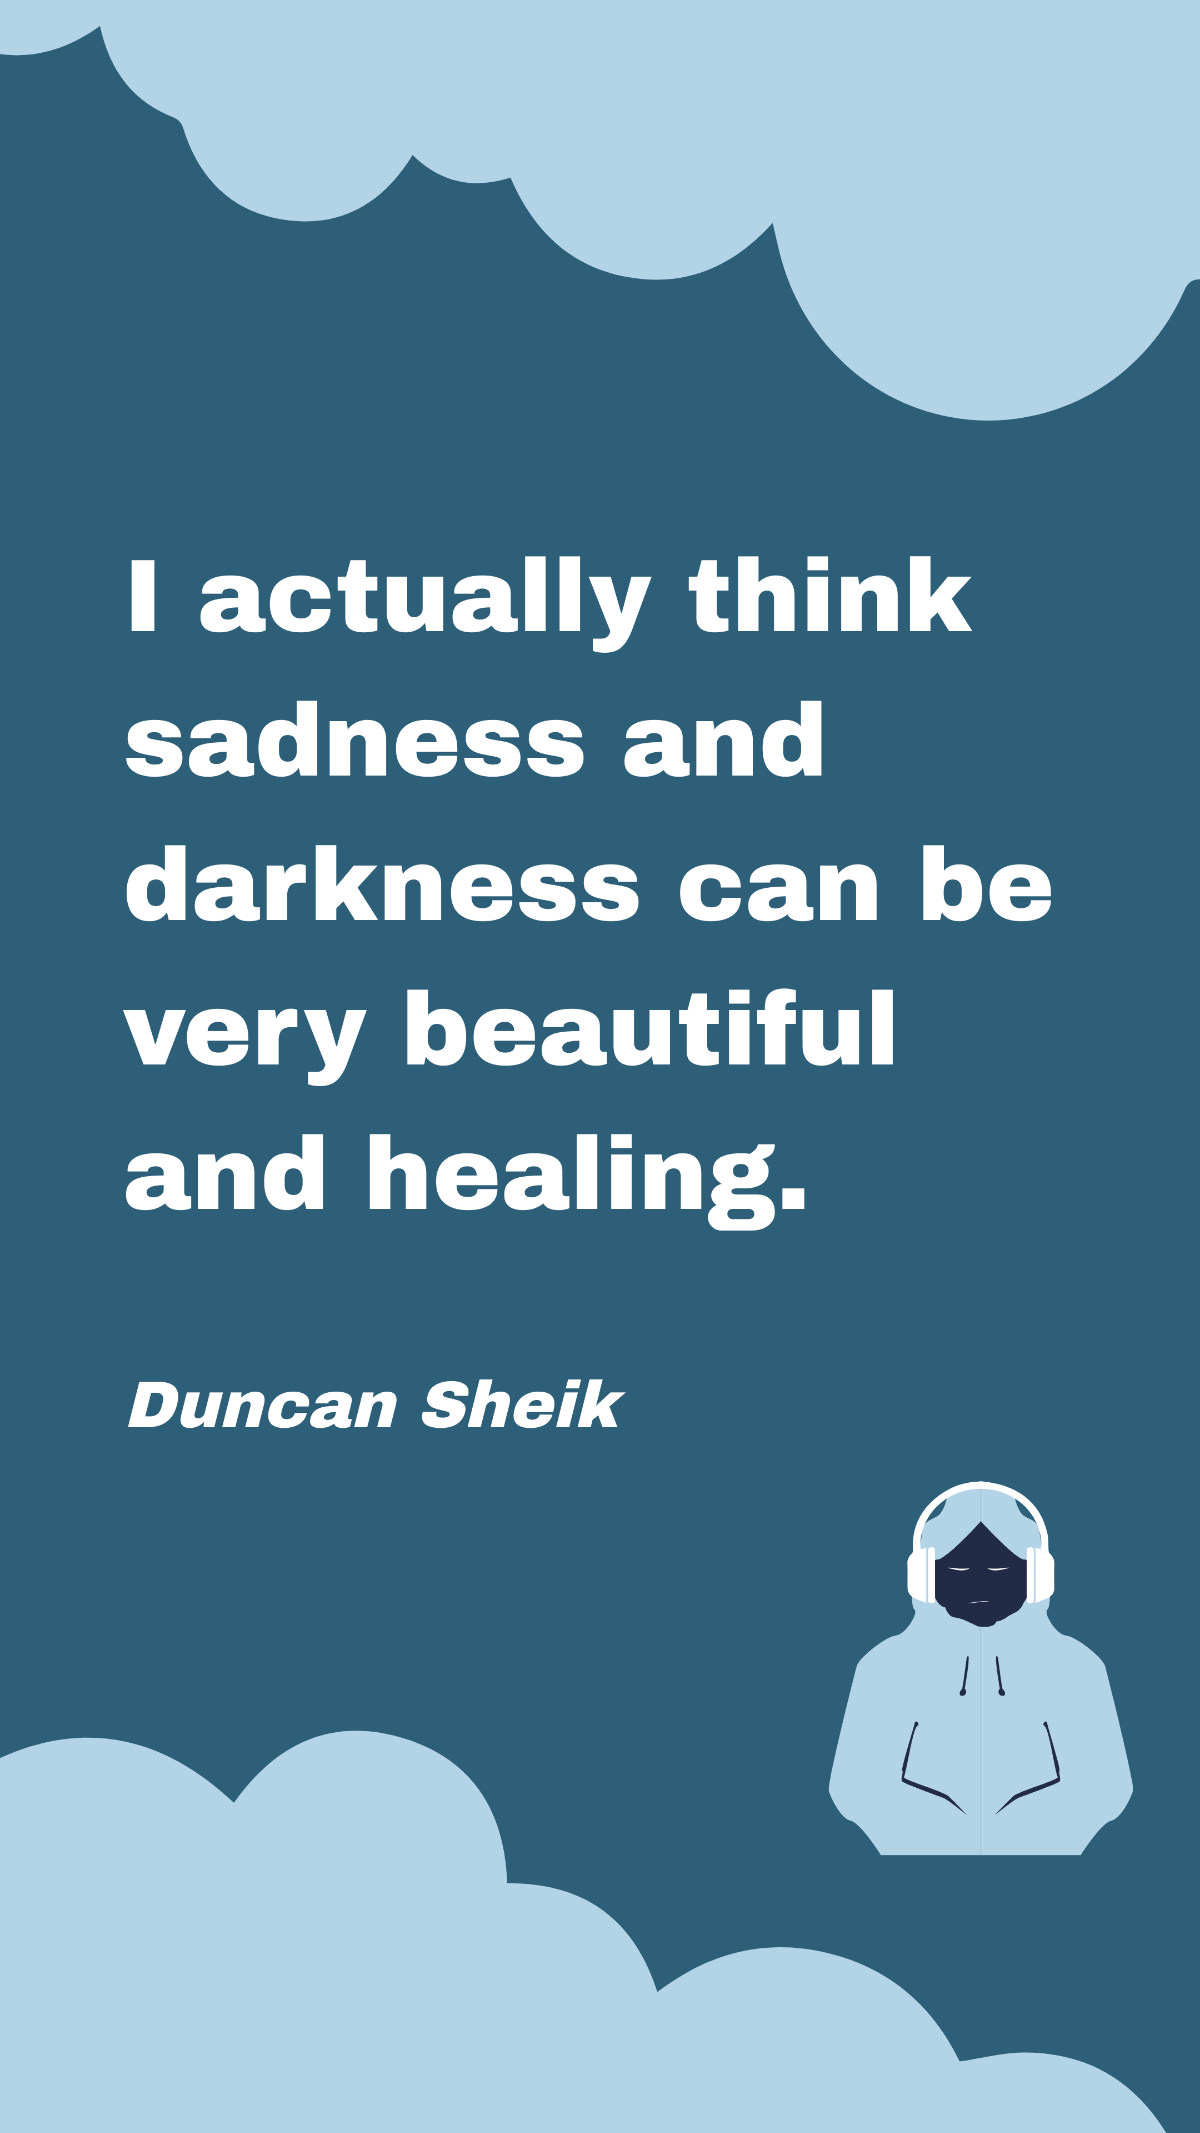 Duncan Sheik - I actually think sadness and darkness can be very beautiful and healing. Template